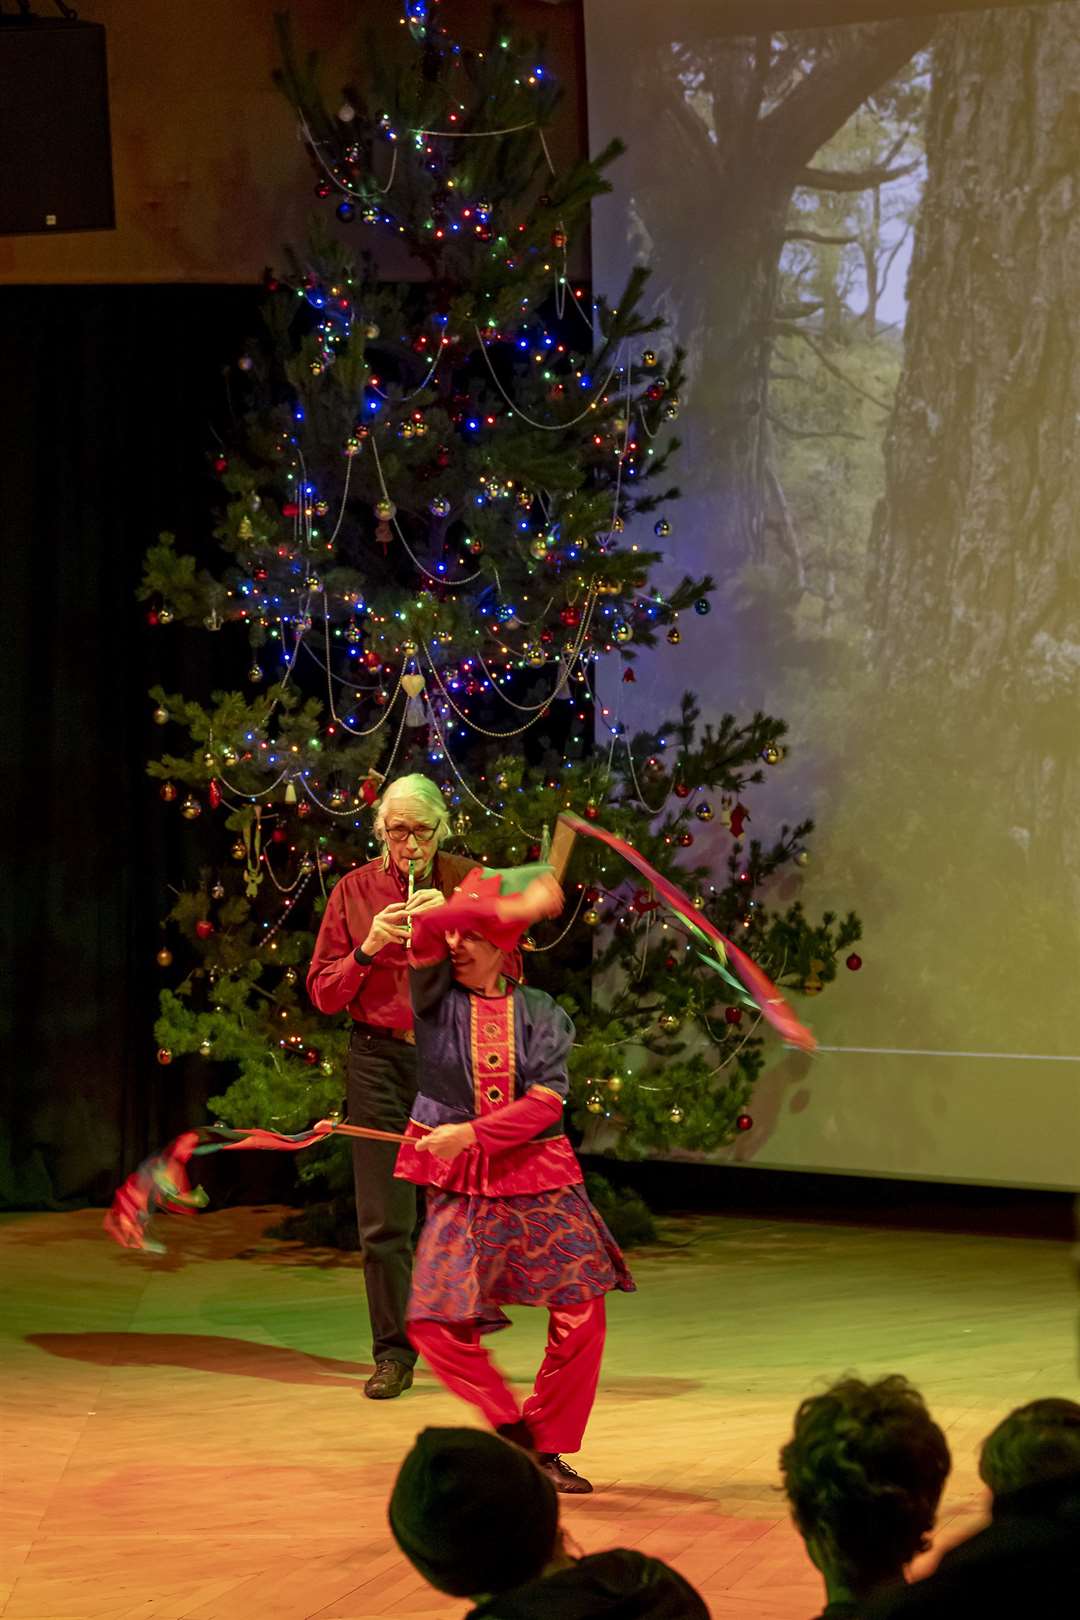 Sharon Took-Zozaya and Rory O'Connell in 'Dancing Elf'. Picture by Mark Richards - Aurora Imaging